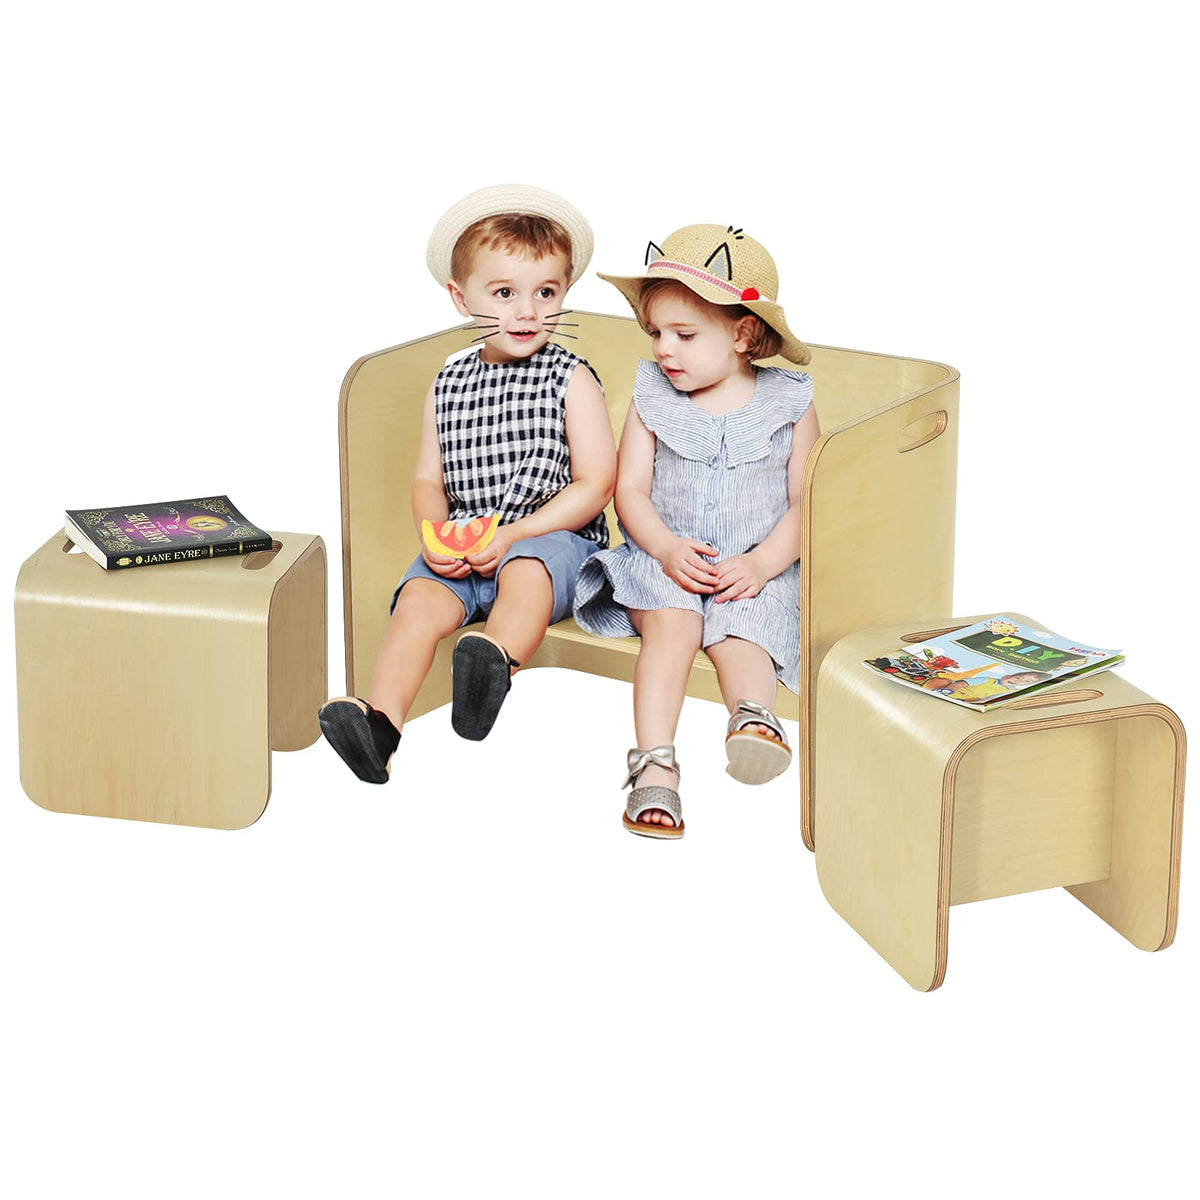 Kids Table and Chair Set, 3 Pieces Wooden Activity Table Bench w/Storage Shelves